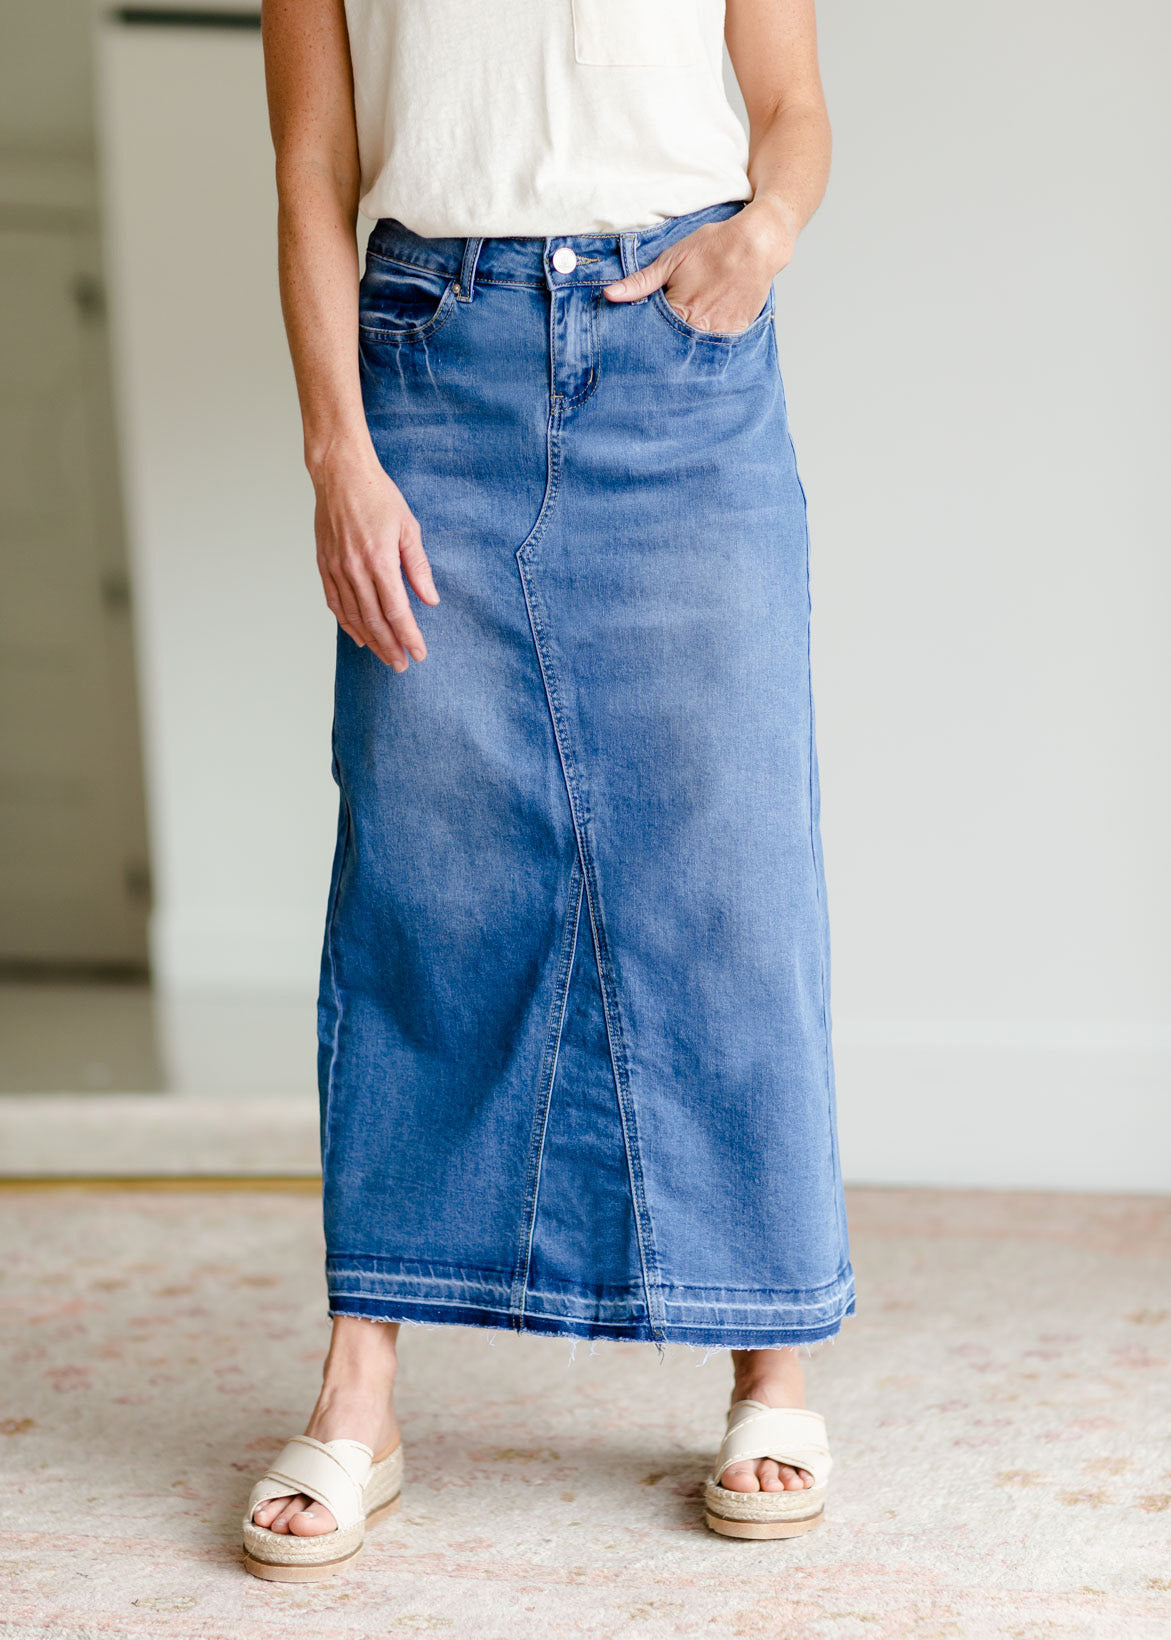 The Stacy skirt is long denim with a raw hem and slight monkey washing in a medium wash. This is an inherit designed long denim mdest skirt.